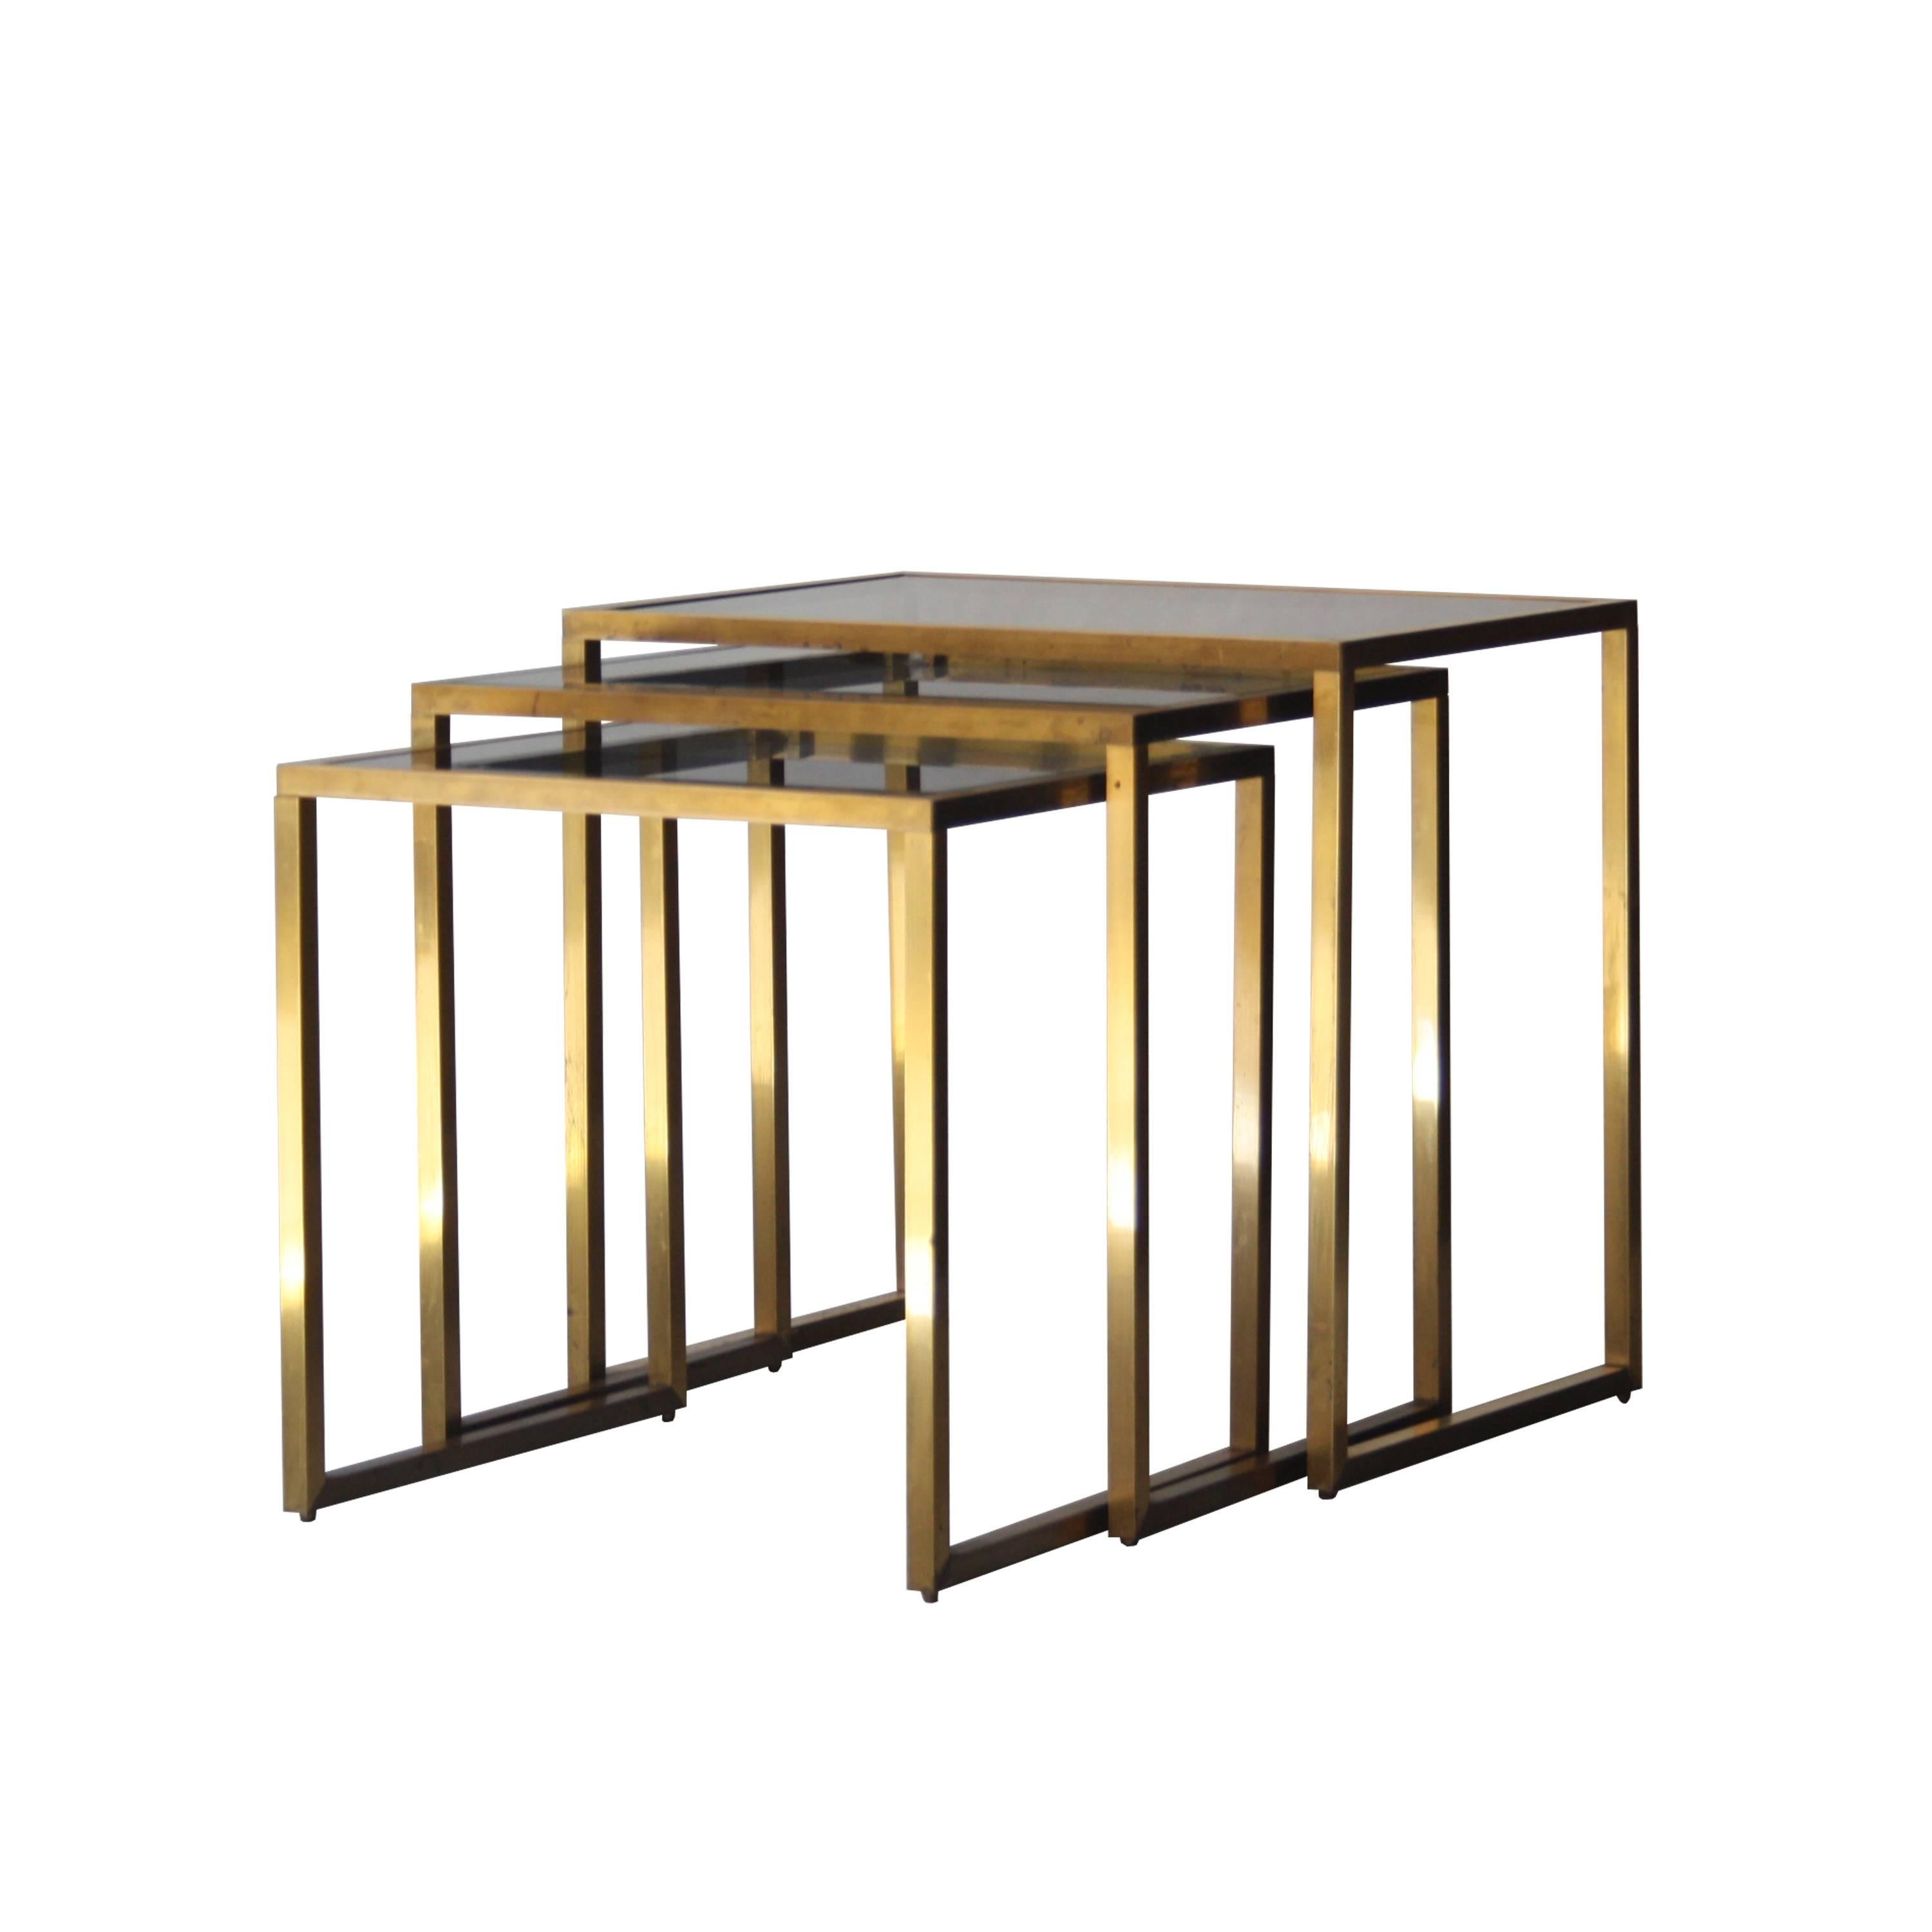 Set of three nest side tables with brass structure and smoked glass tops.